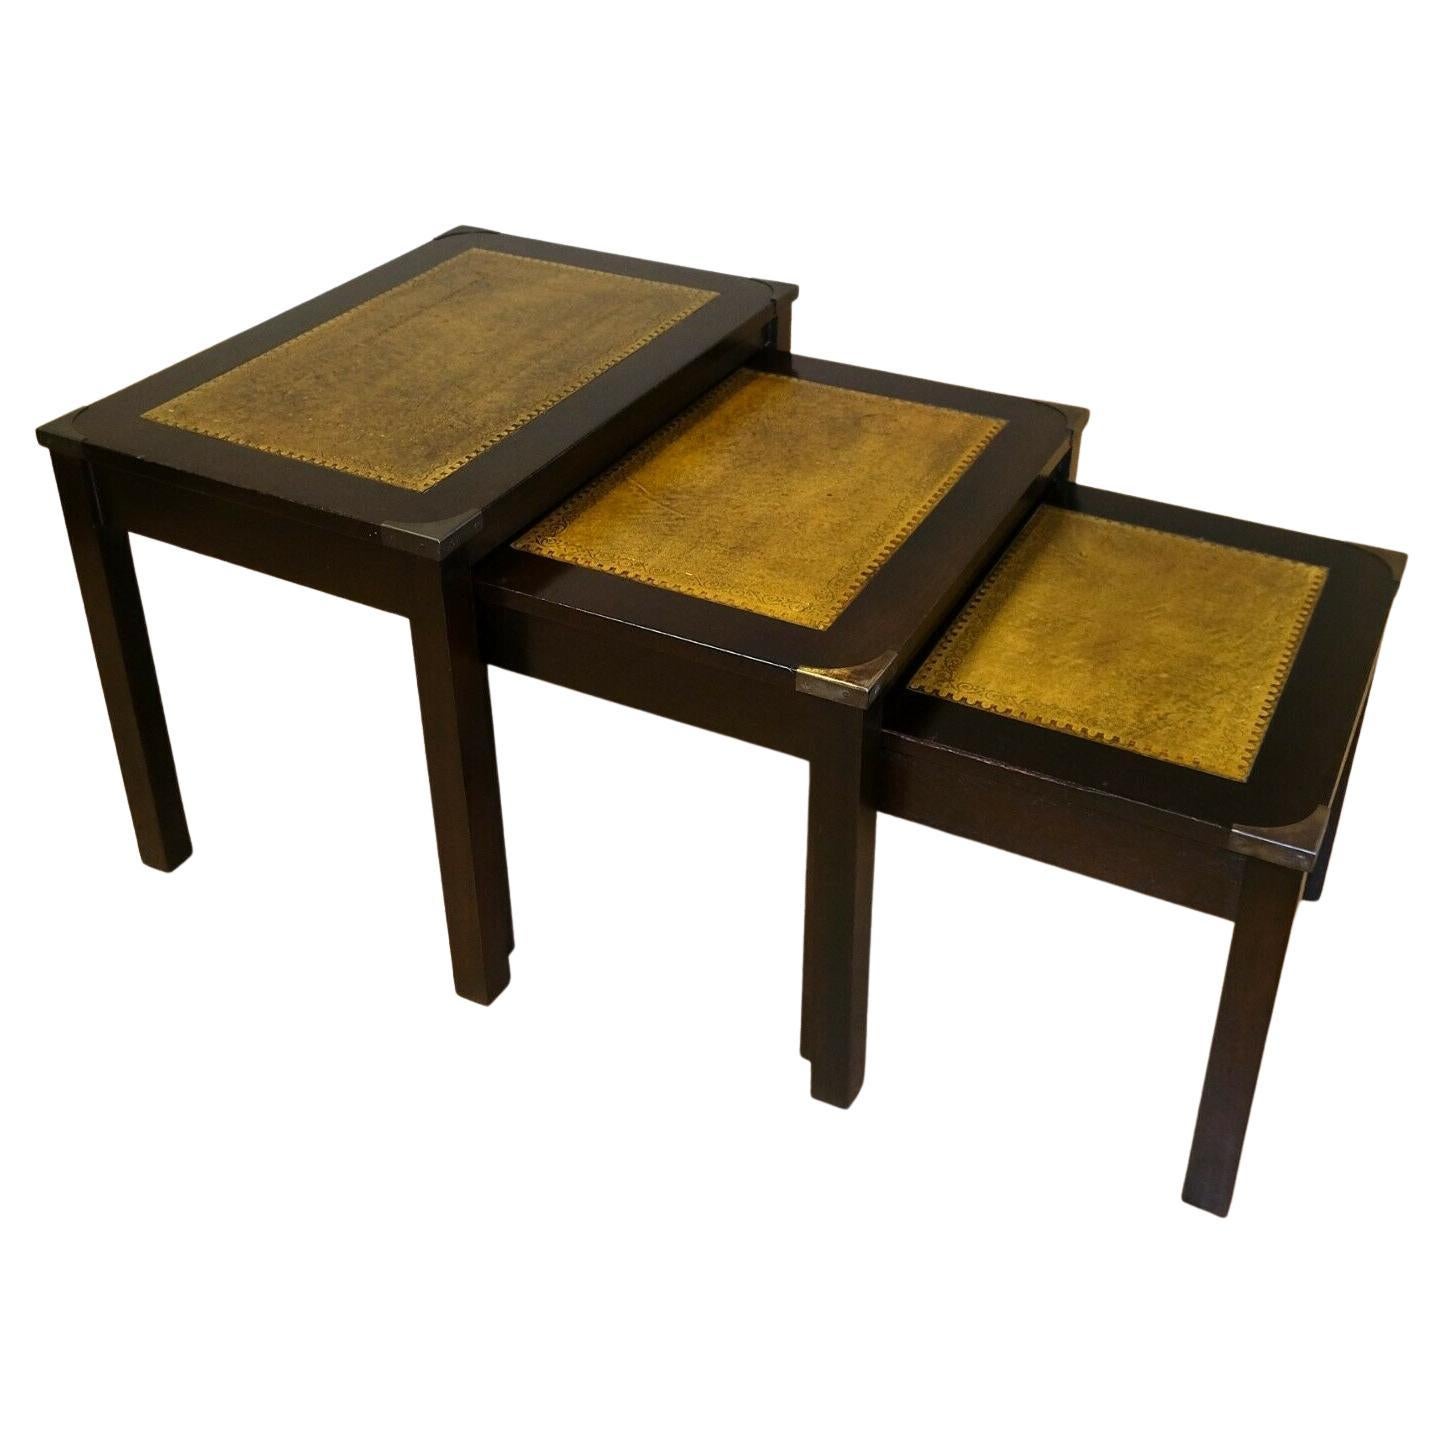 Stunning Bevan Funnell Hardwood Campaign Nest of Tables with Leather Tops For Sale